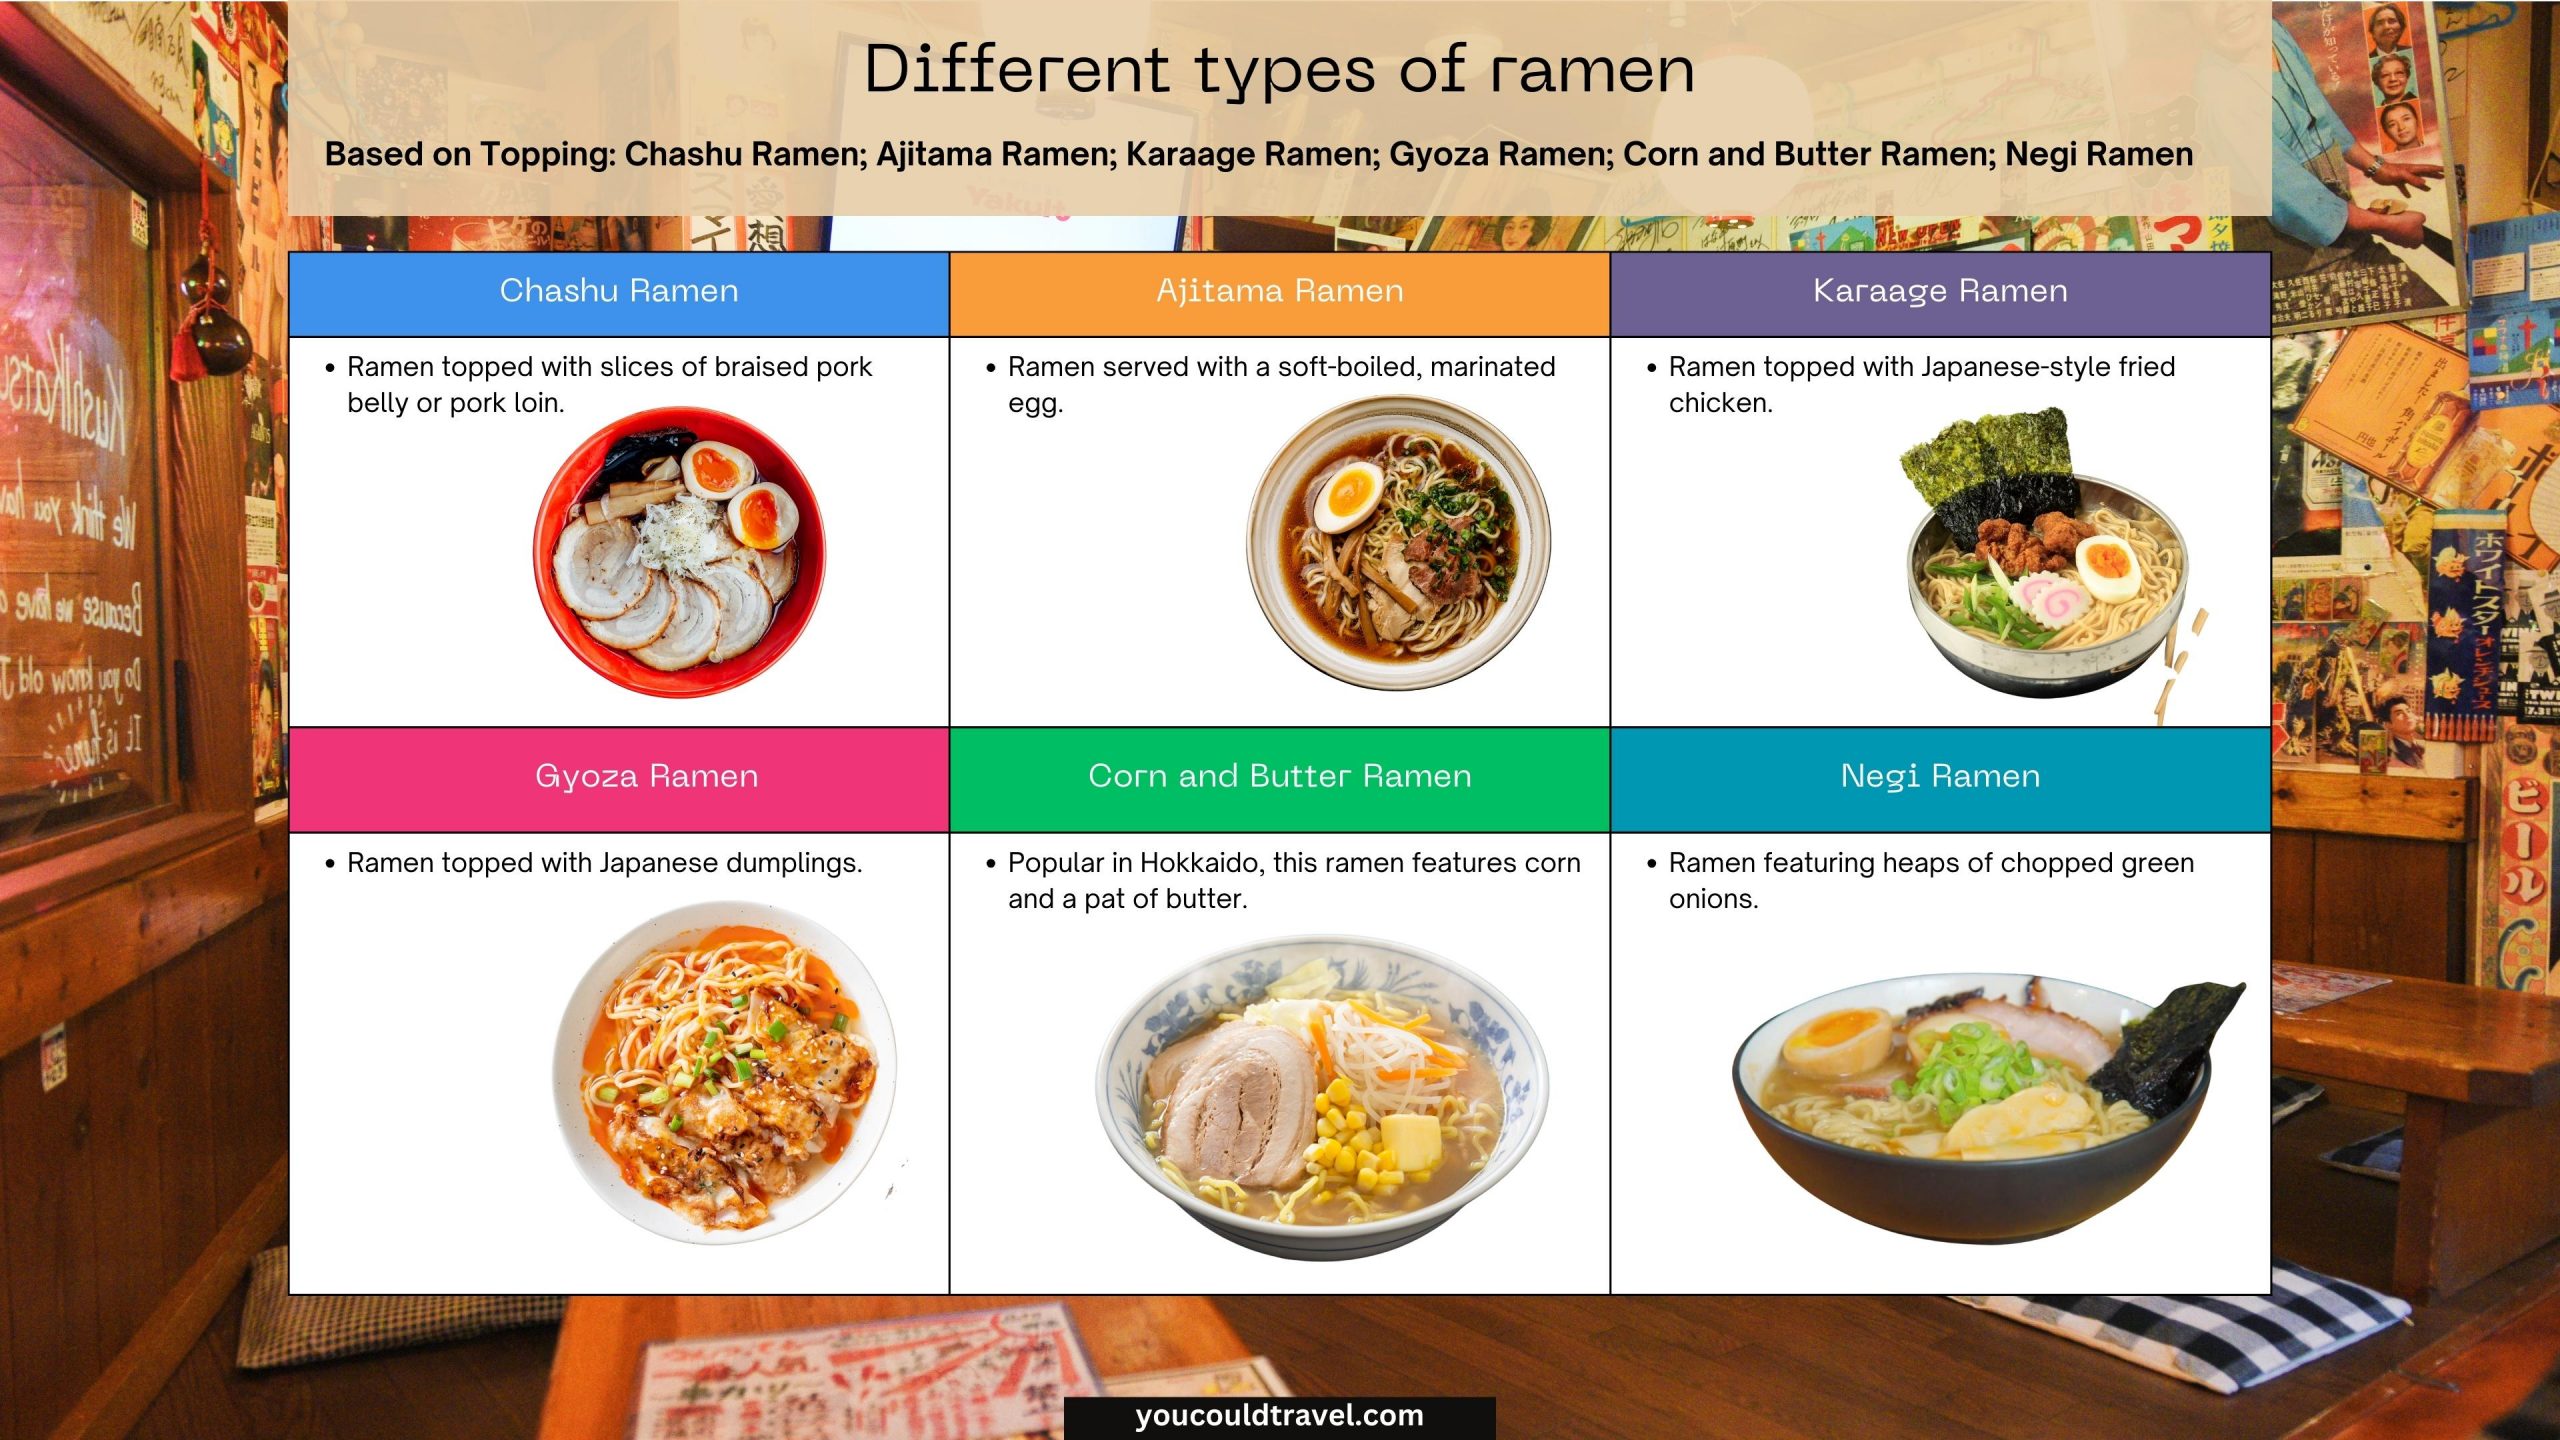 Different types of ramen based on topping